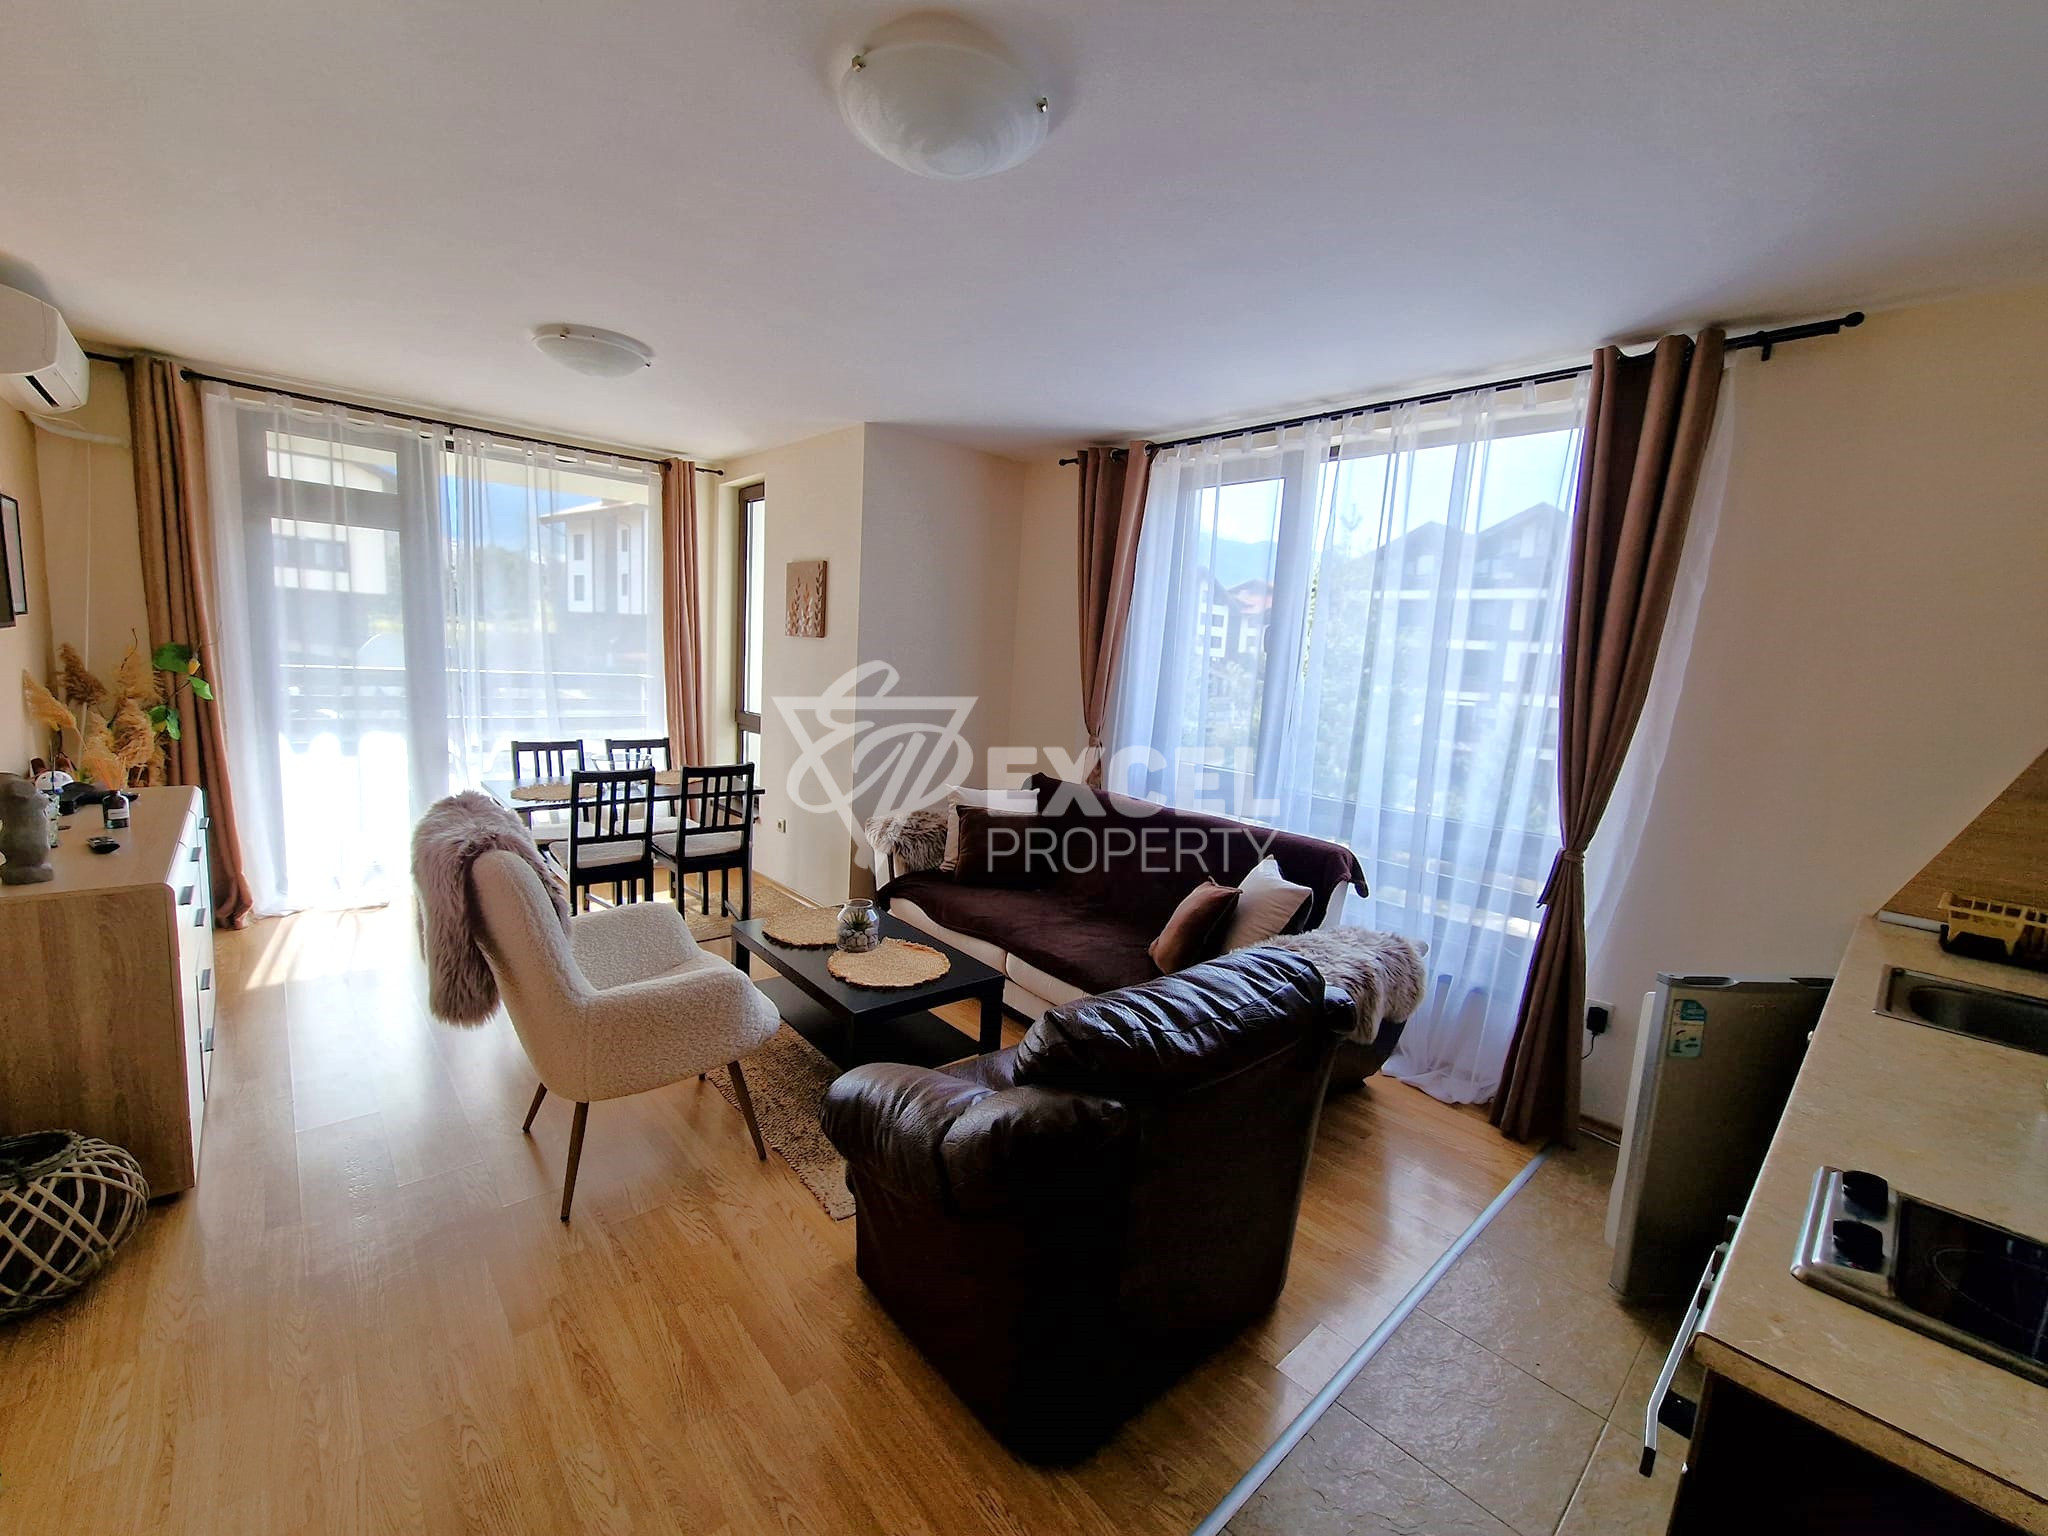 Furnished One-bedroom apartment with air conditioning at a bargain price for sale in Aspen Resort